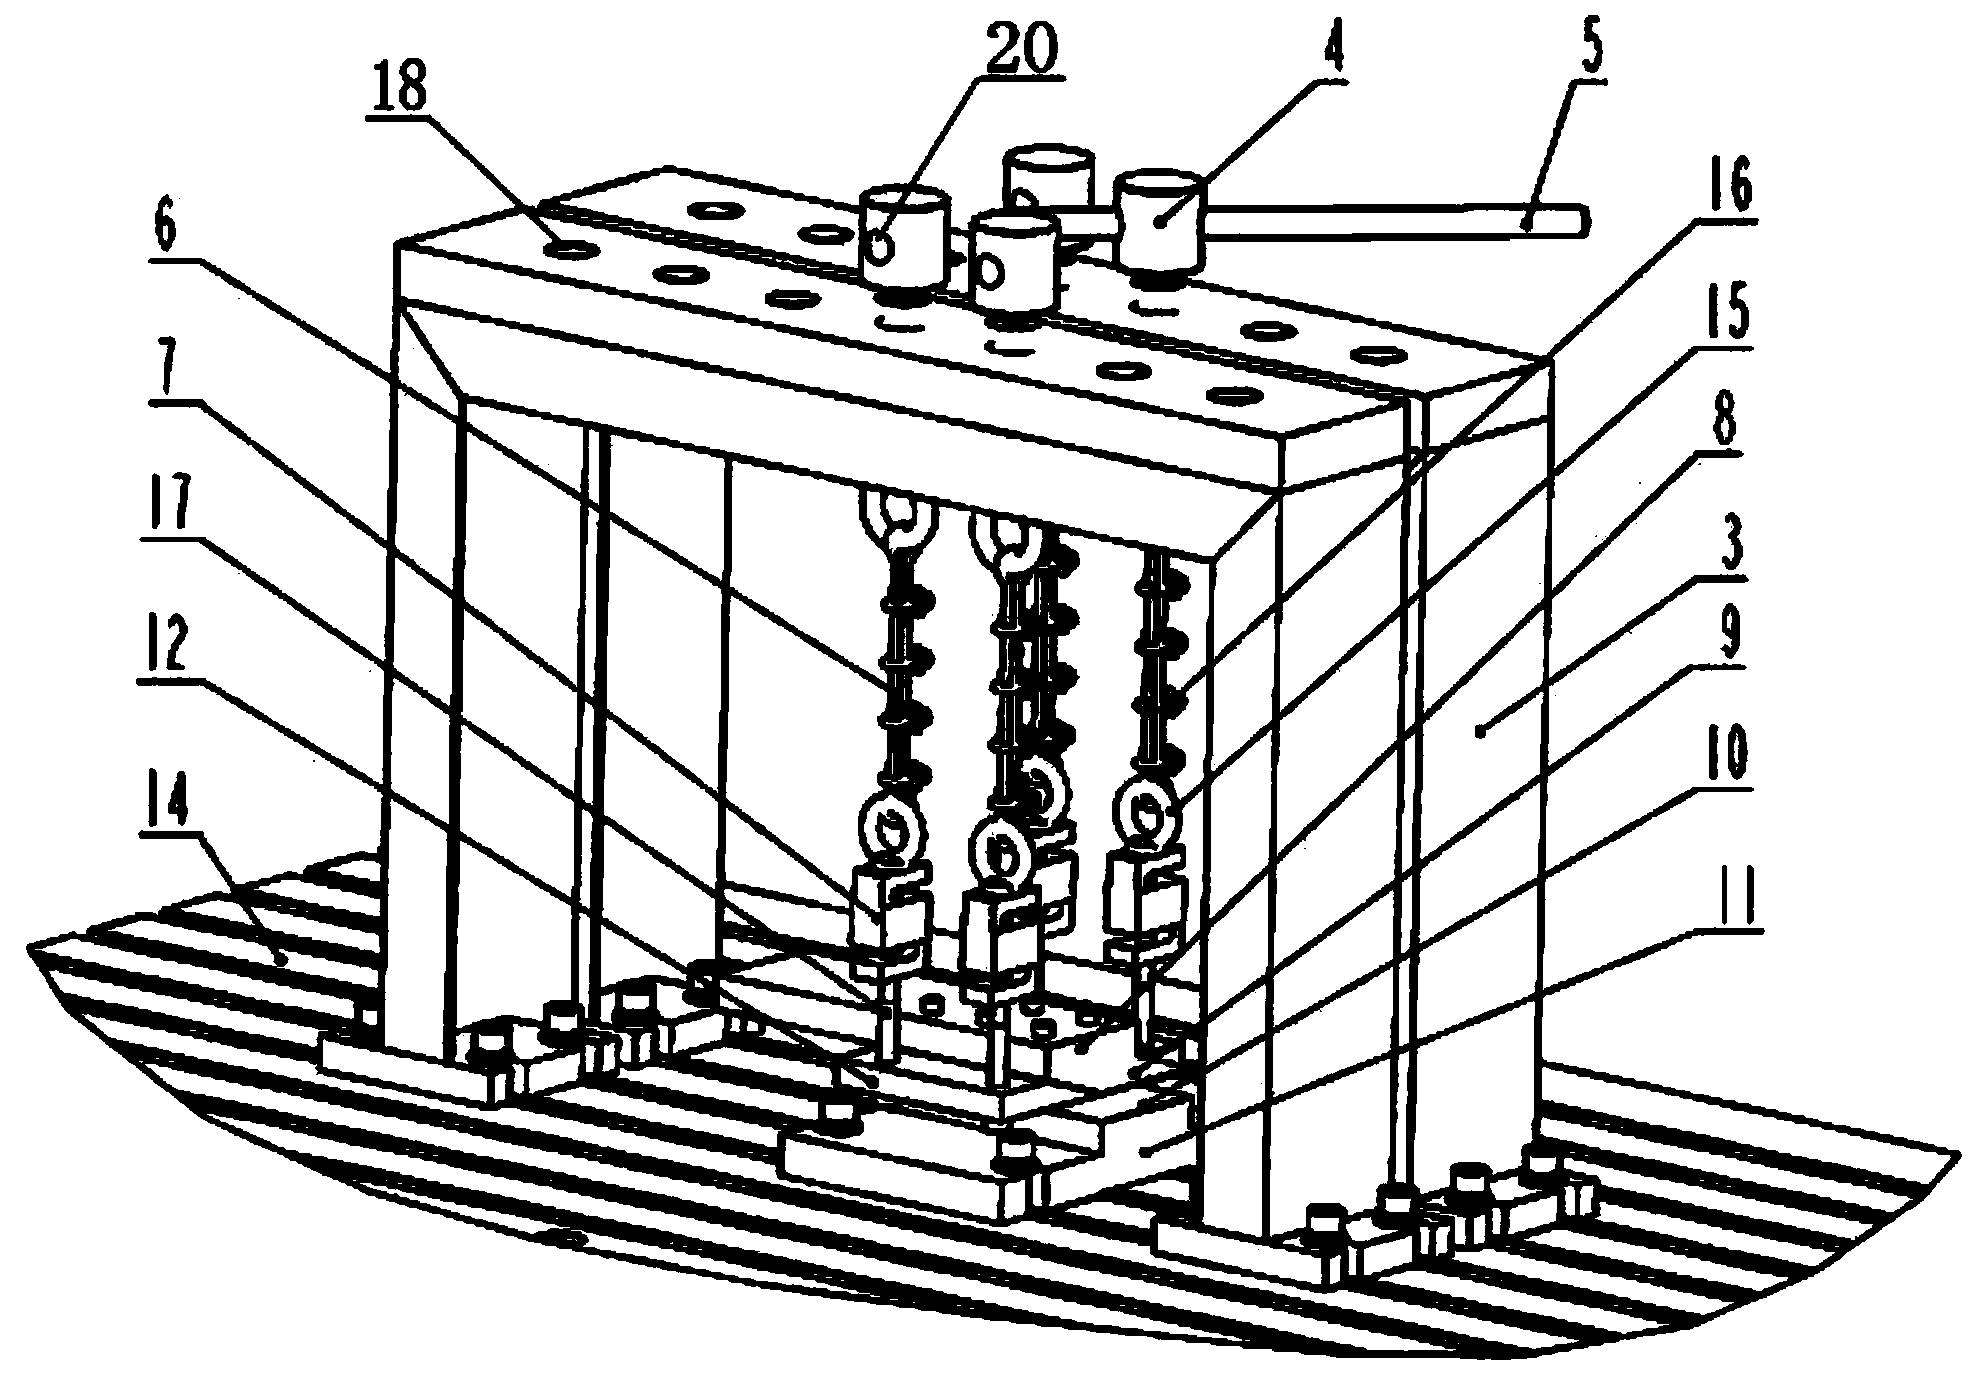 Test device for testing contact characteristic of fixed junction surface of machine tool